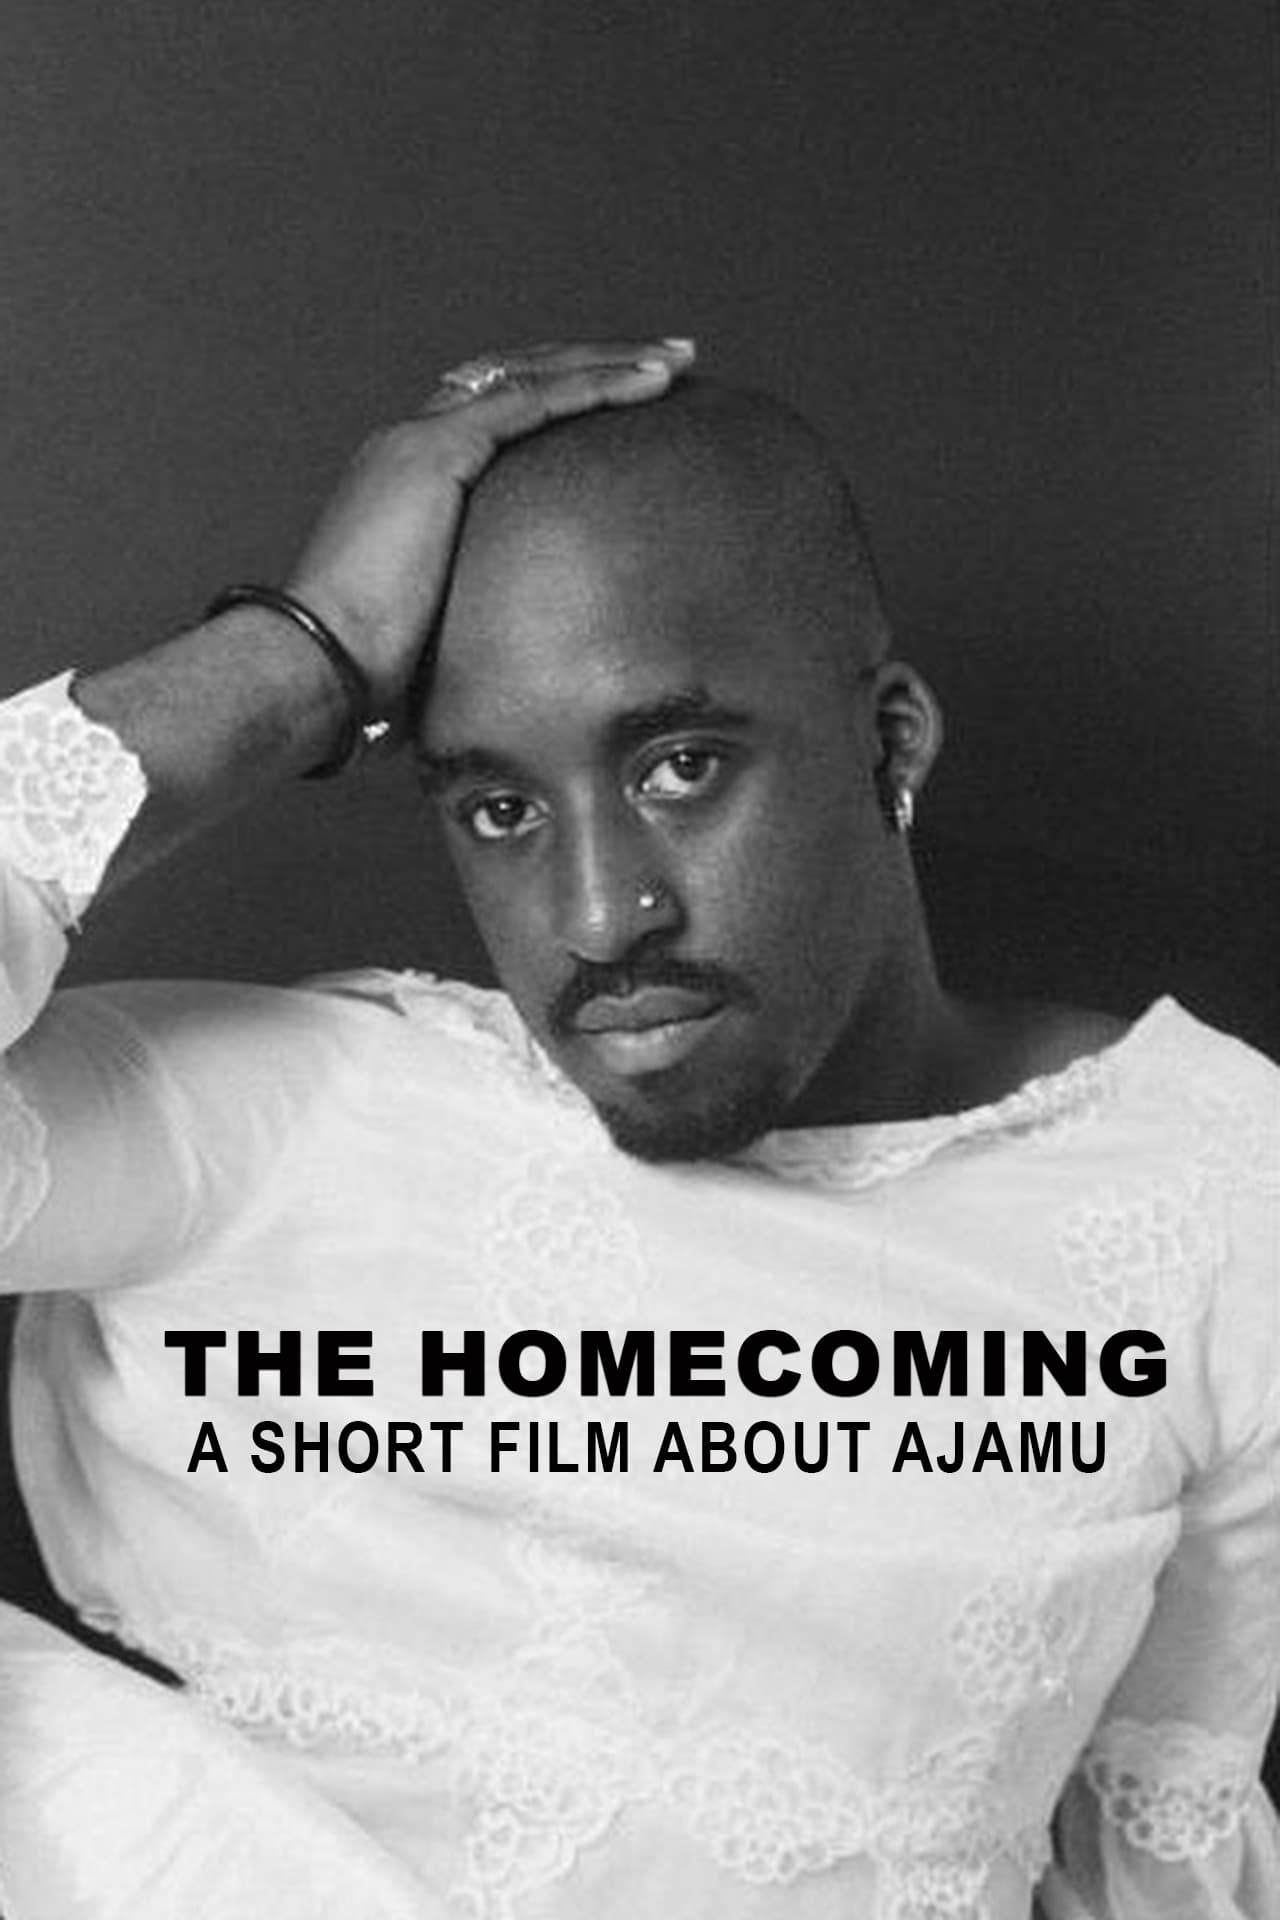 The Homecoming: A Short Film About Ajamu